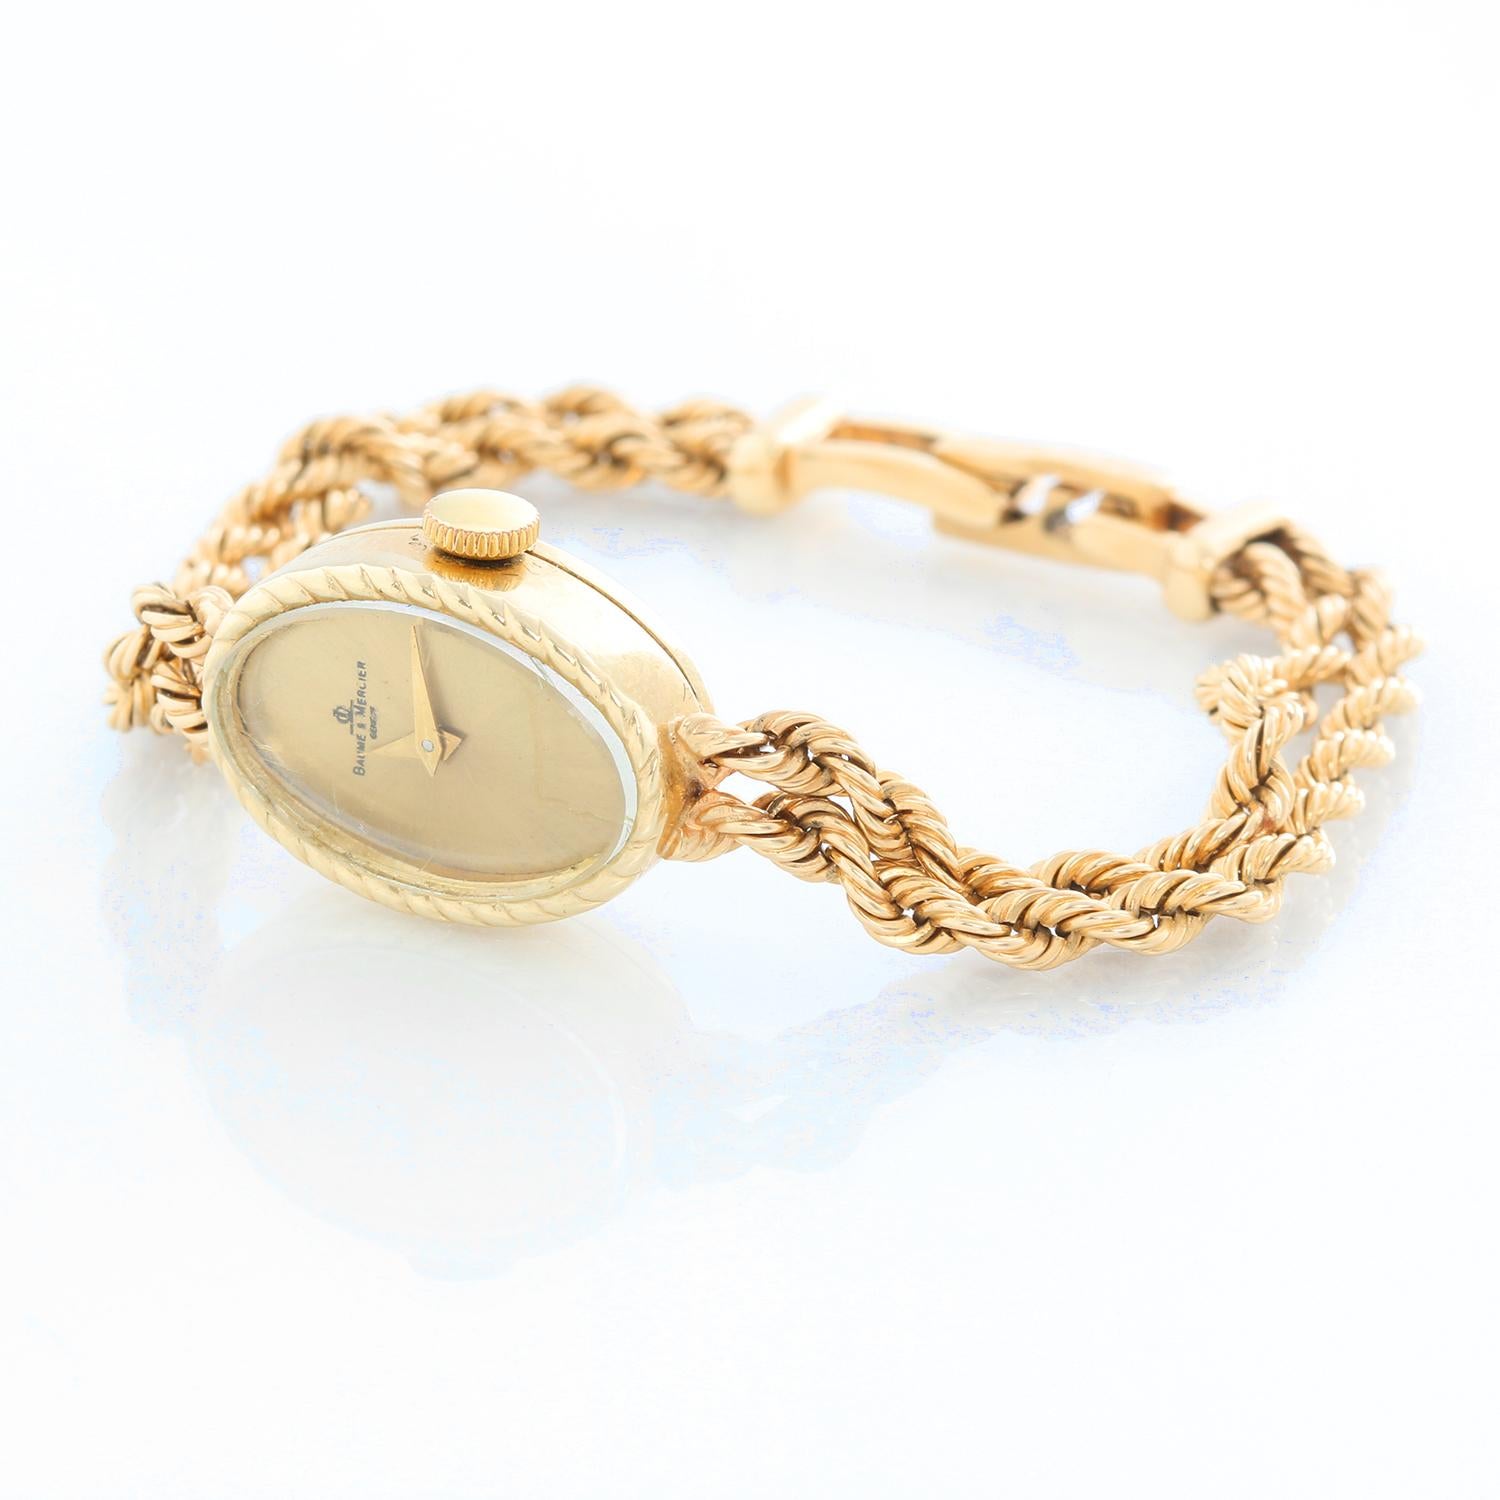 Baume & Mercier Ladies Classic Watch - Quartz. 14K  Yellow gold ( 14 x 20  mm ). Champagne dial. 14K Yellow double rope link bracelet; will fit up to a 6 inch wrist . Pre-owned with Baume & Mercier  box. 